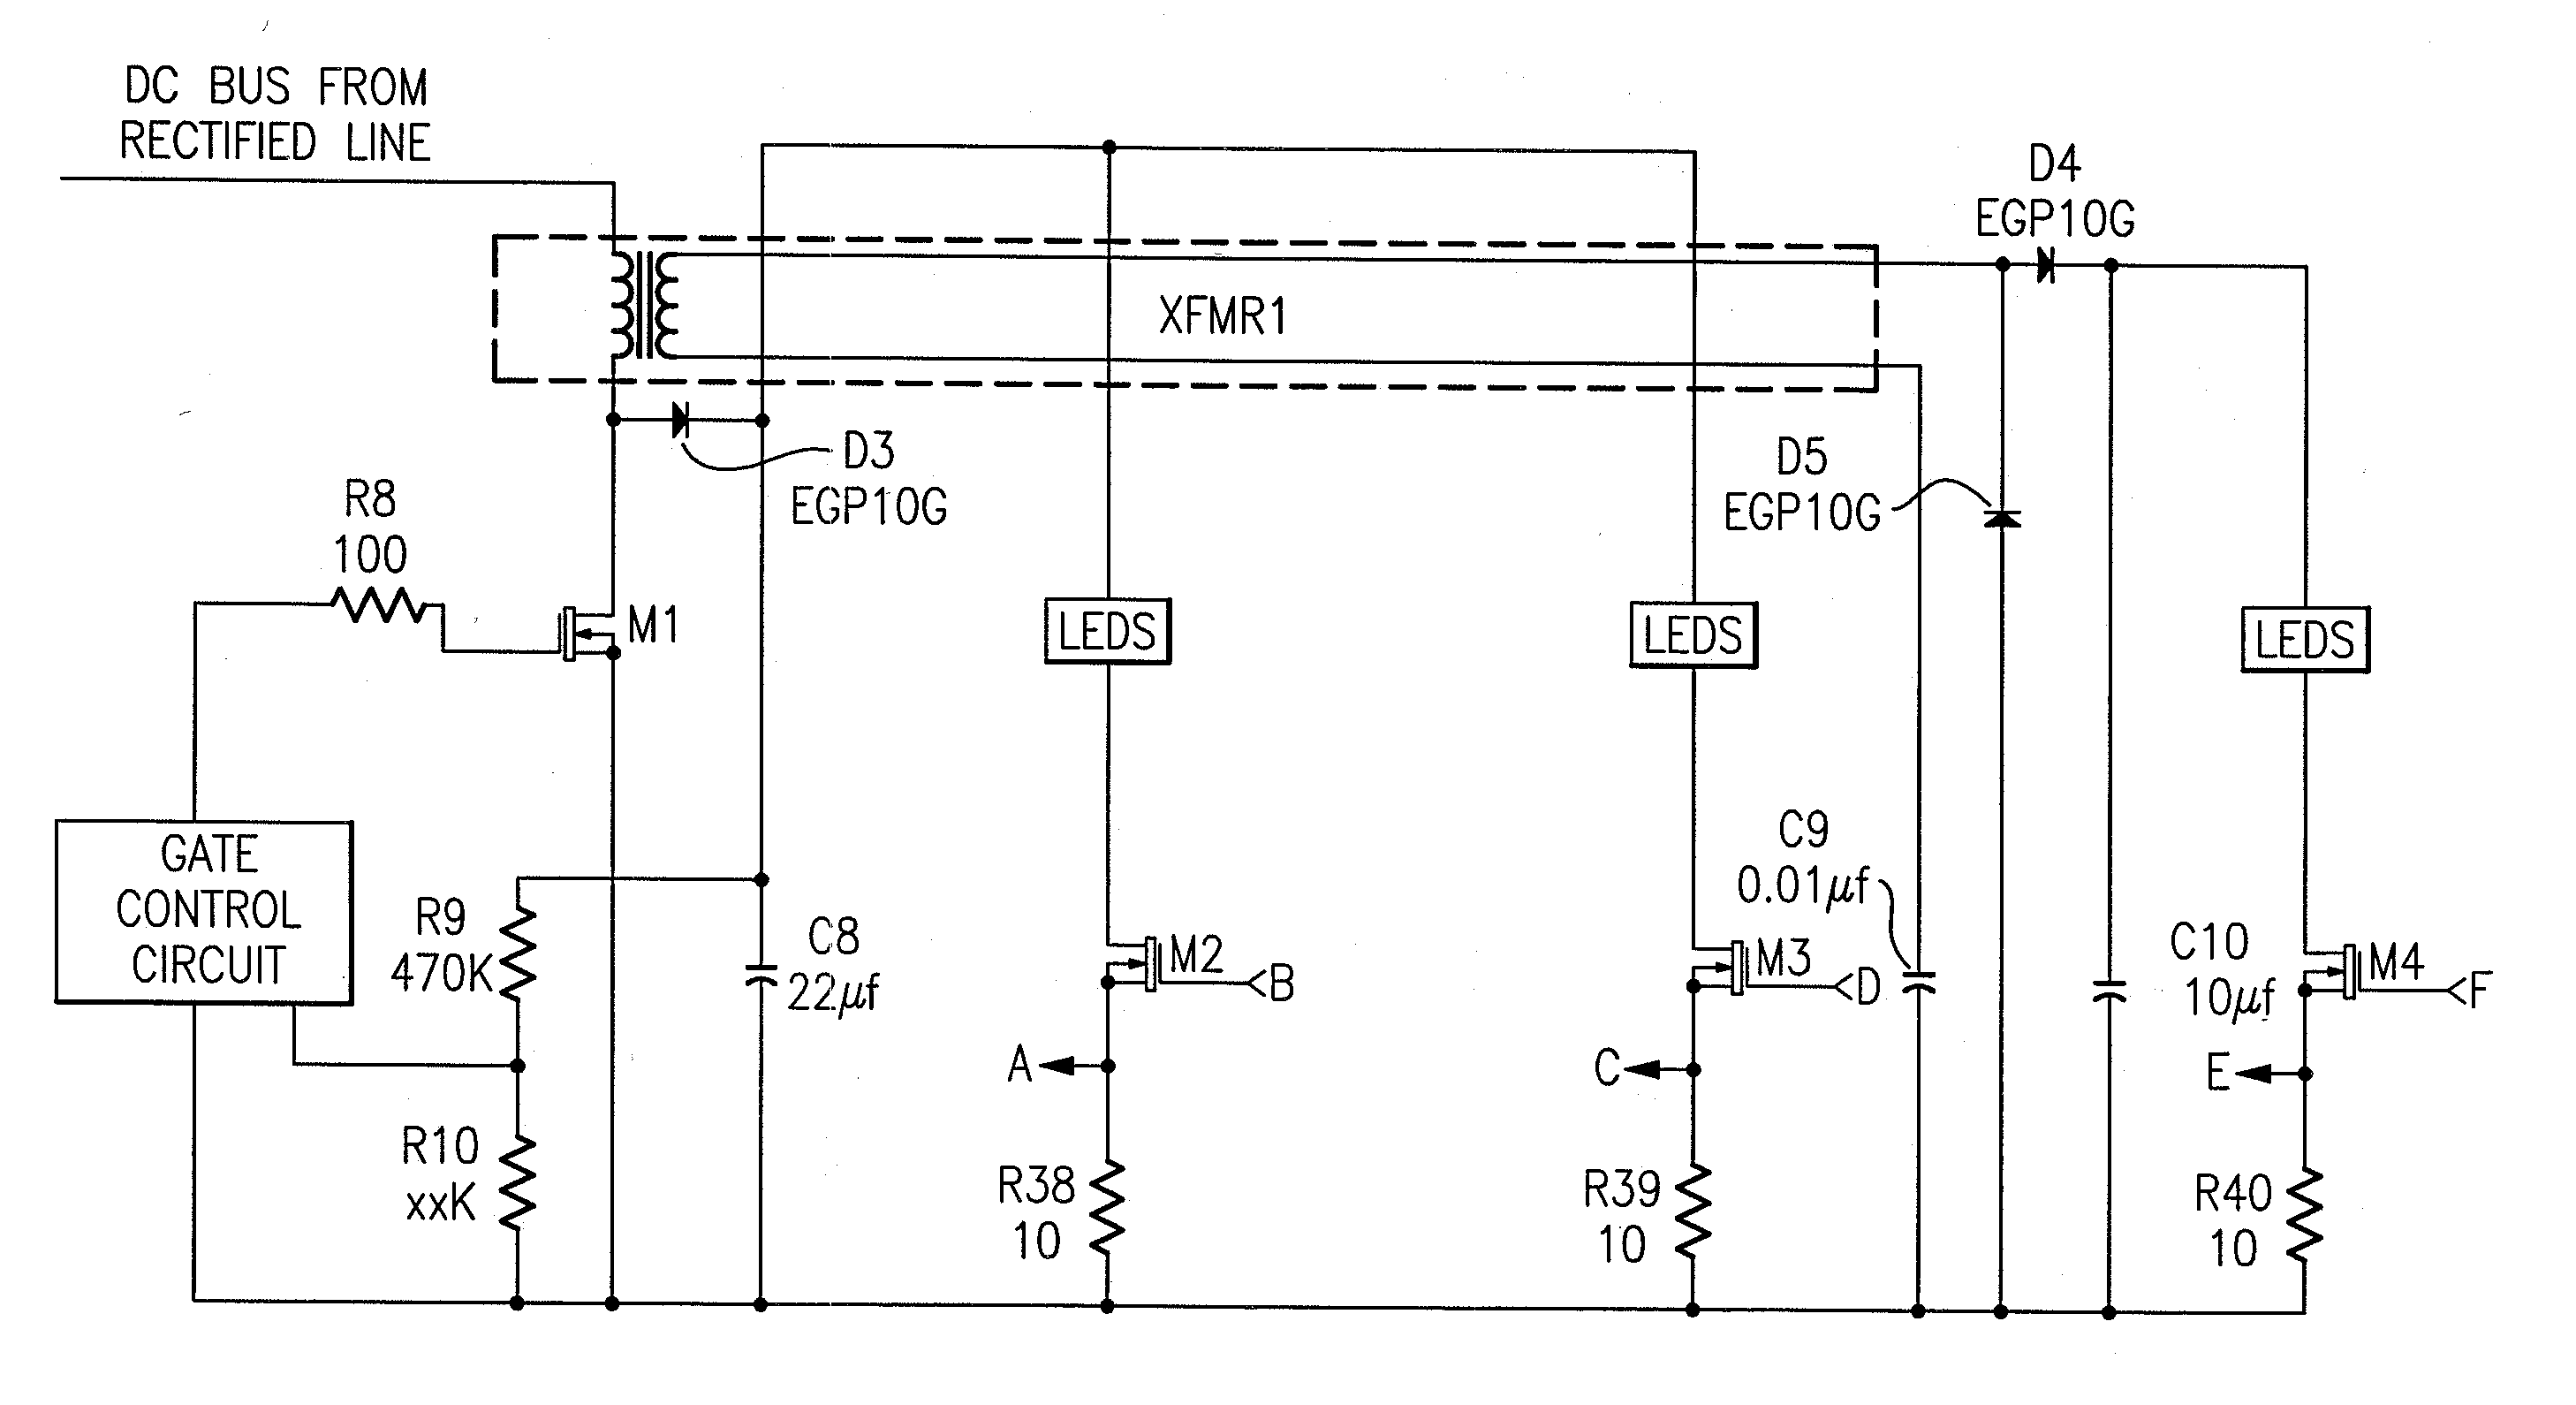 Circuitry for supplying electrical power to loads